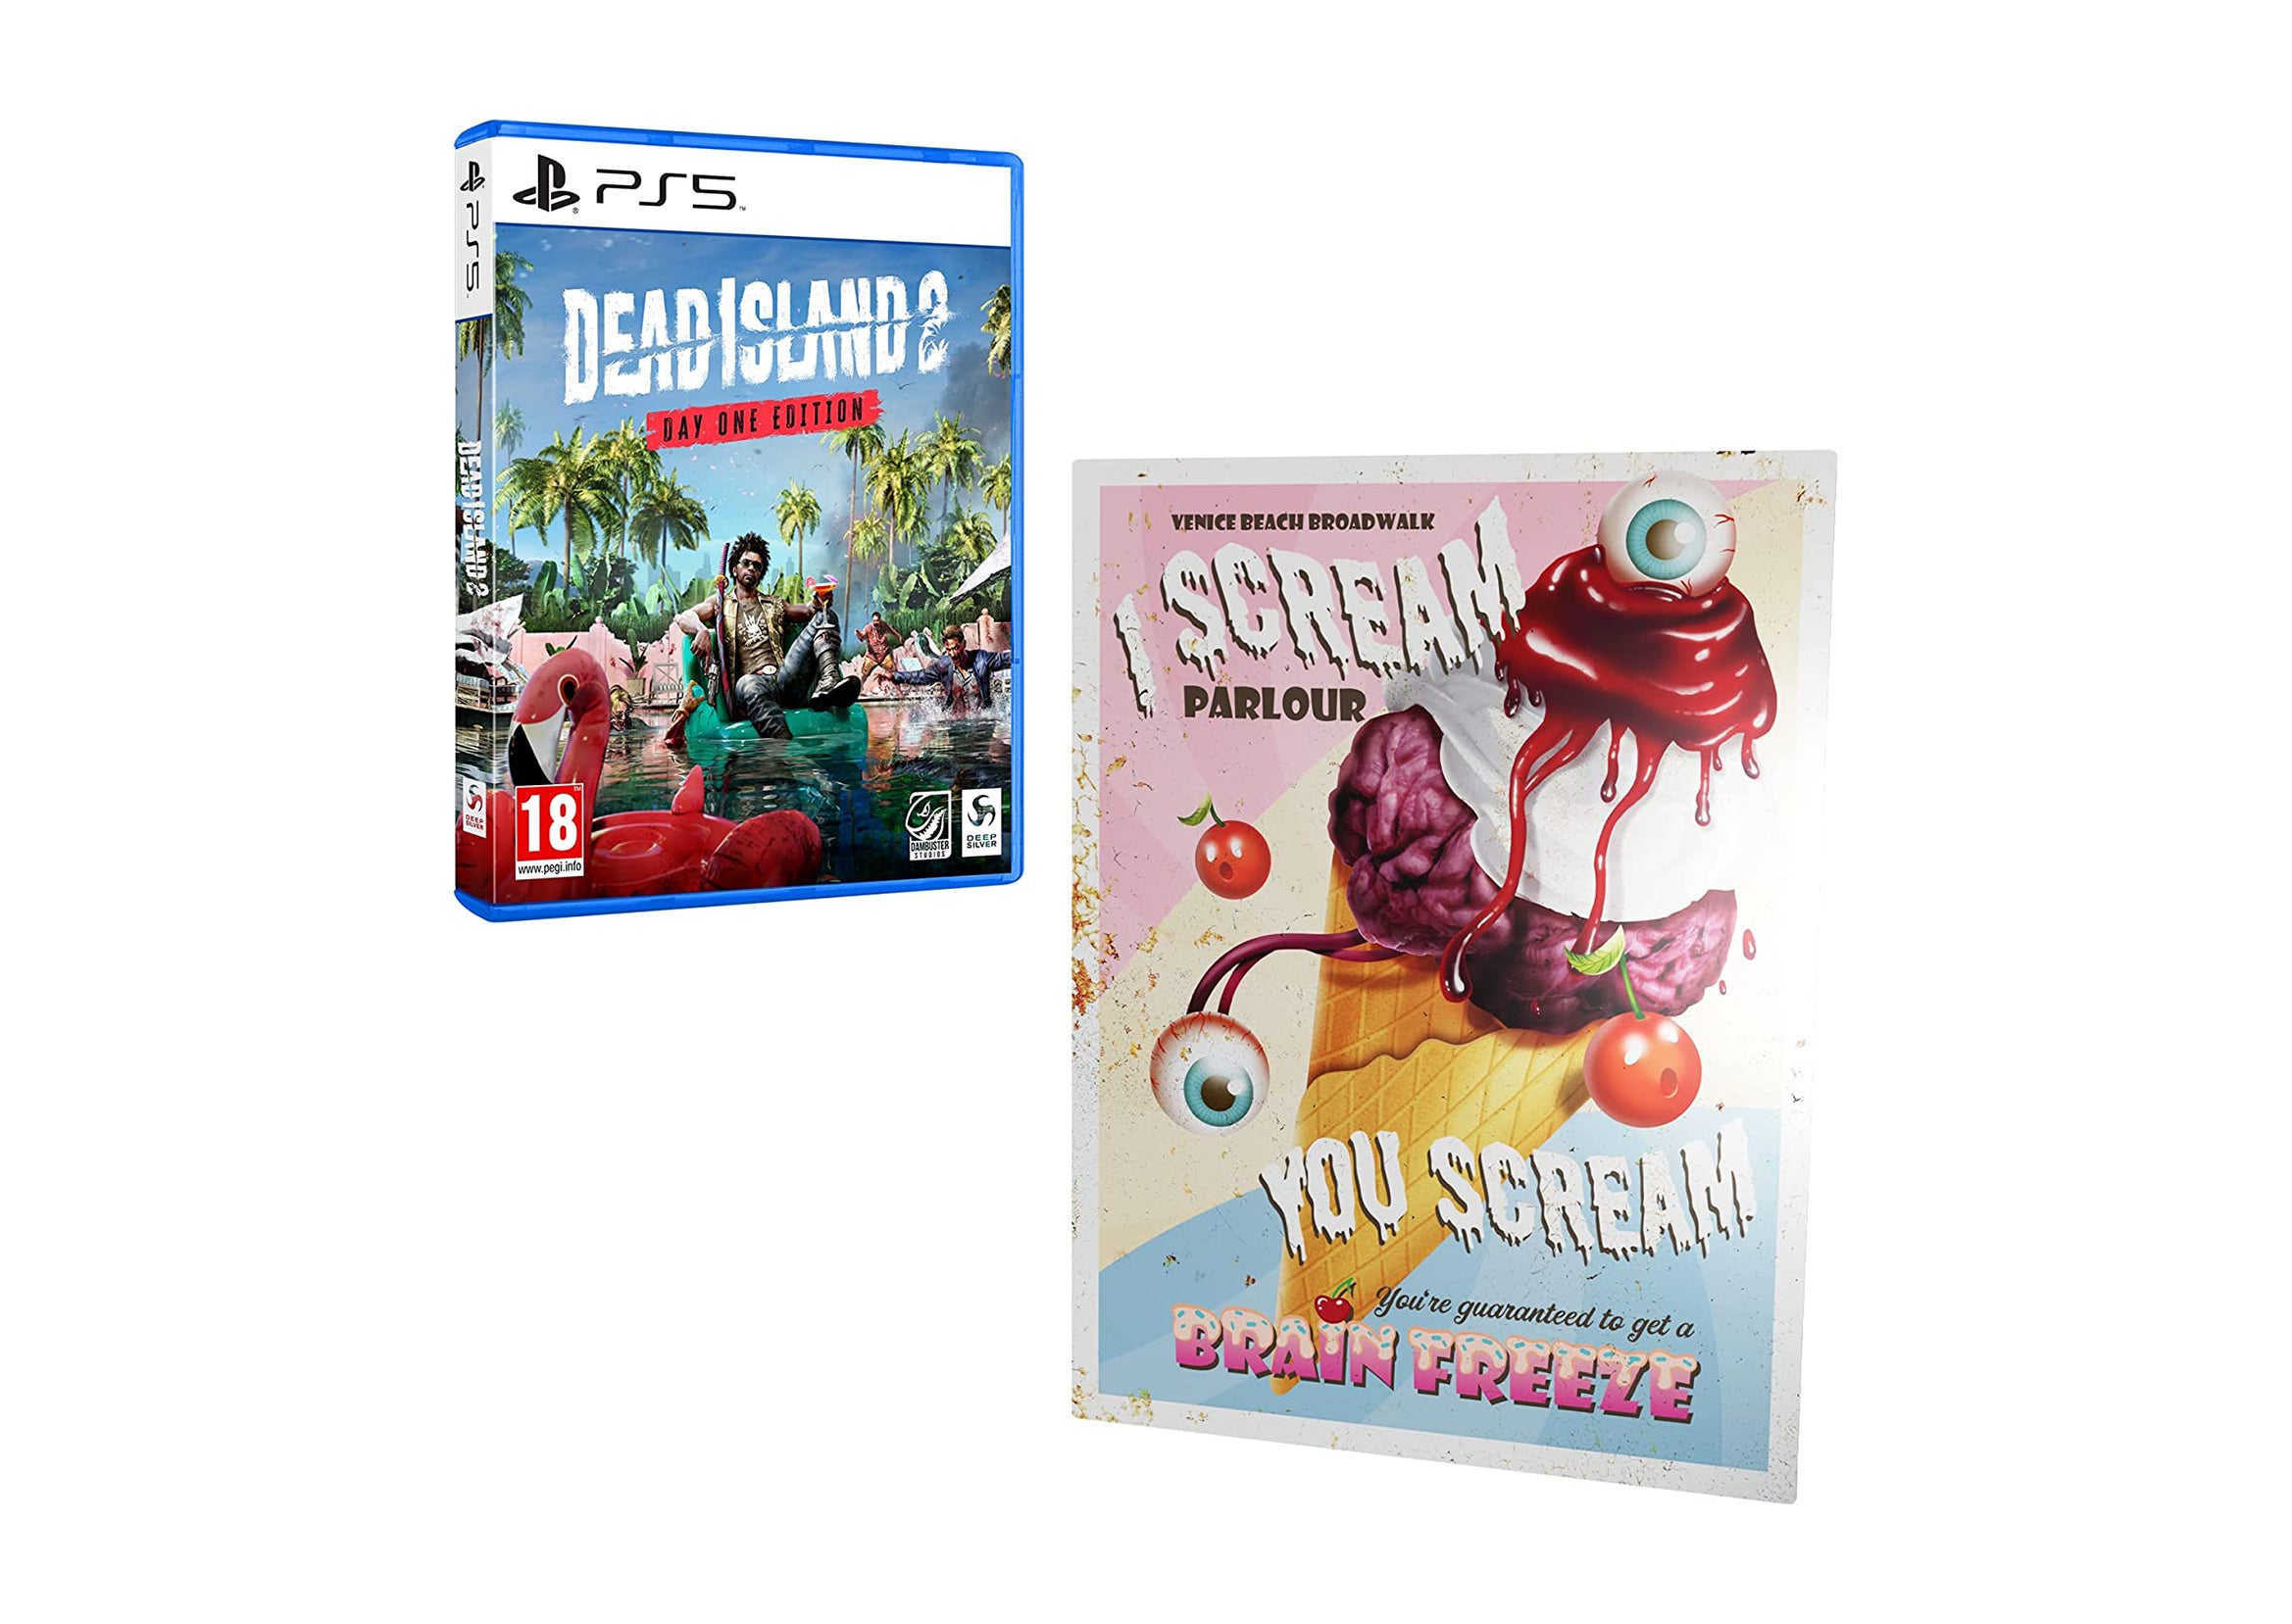 Dead Island 2 release date moved forward: Best pre-order deals on